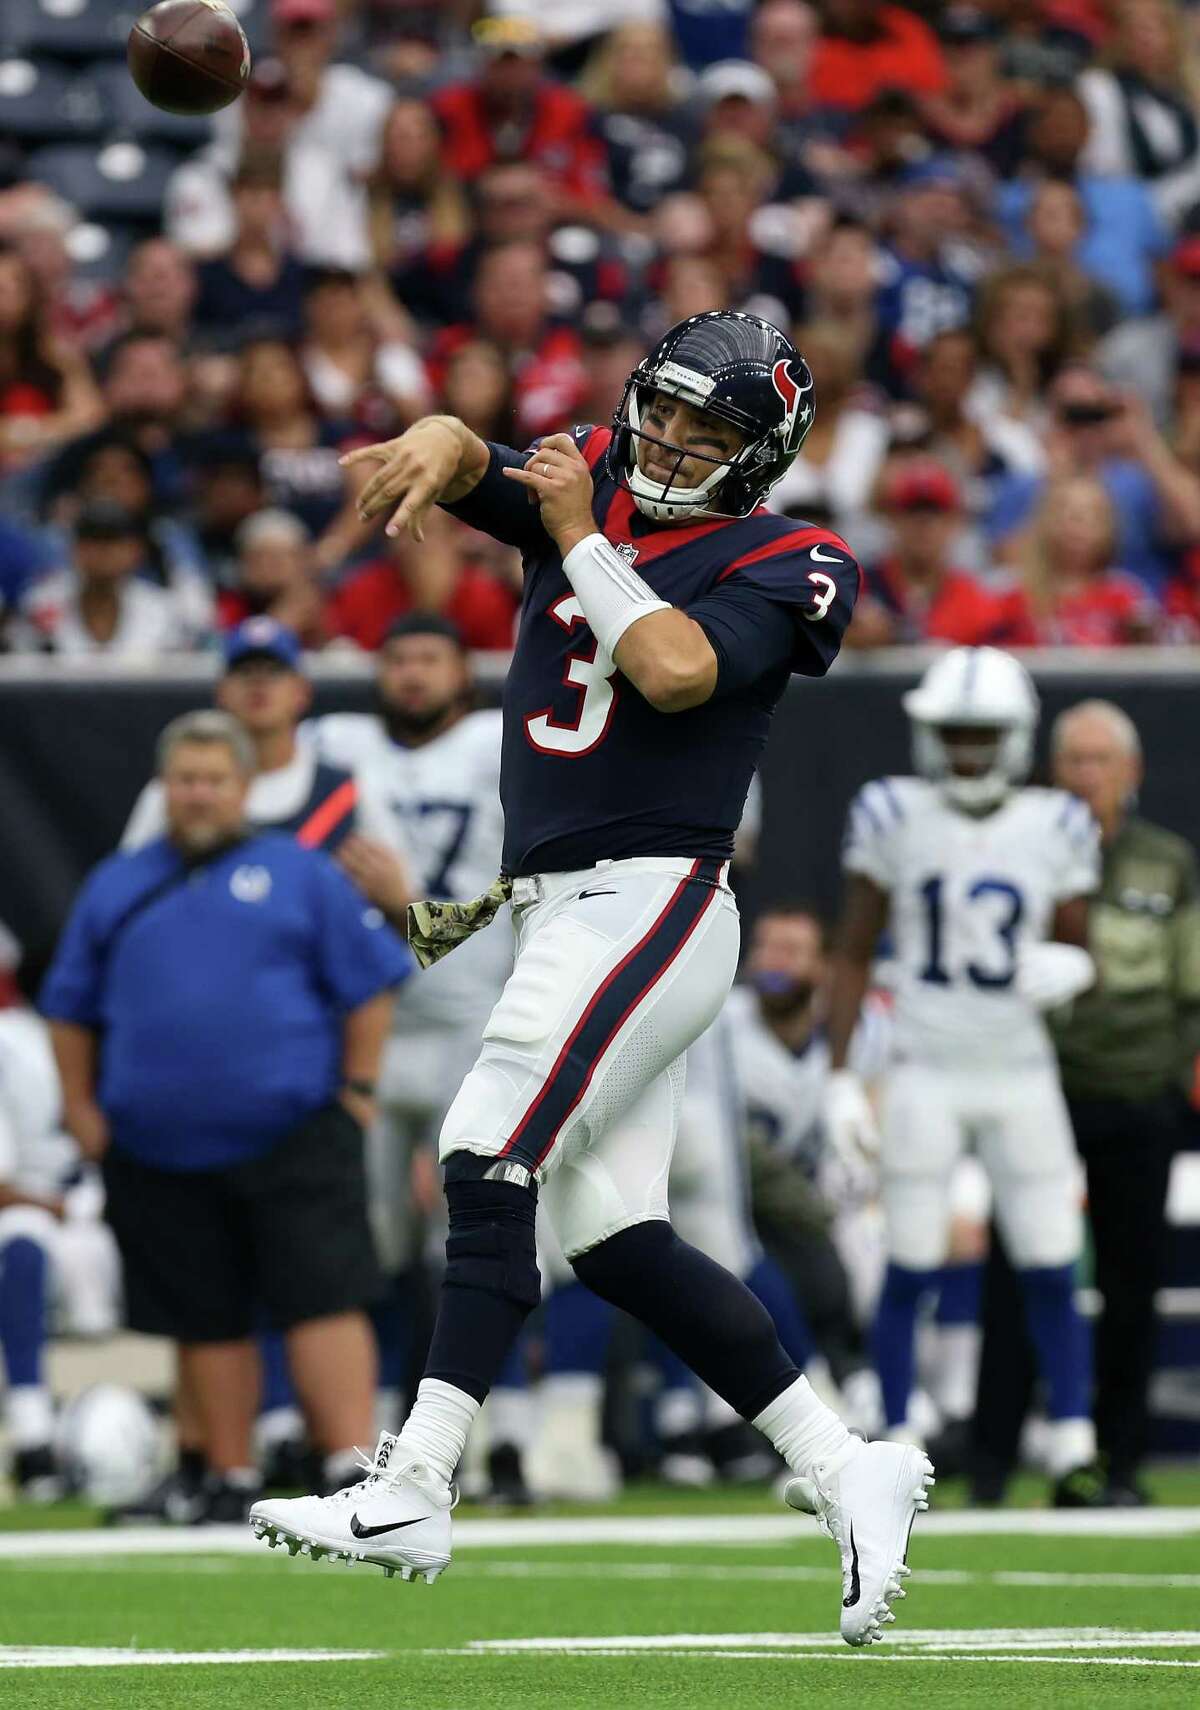 Texans quarterback Tom Savage is confident he can improve his accuracy after completing just 43.2 percent of his passes (19-of-44) against the Colts.